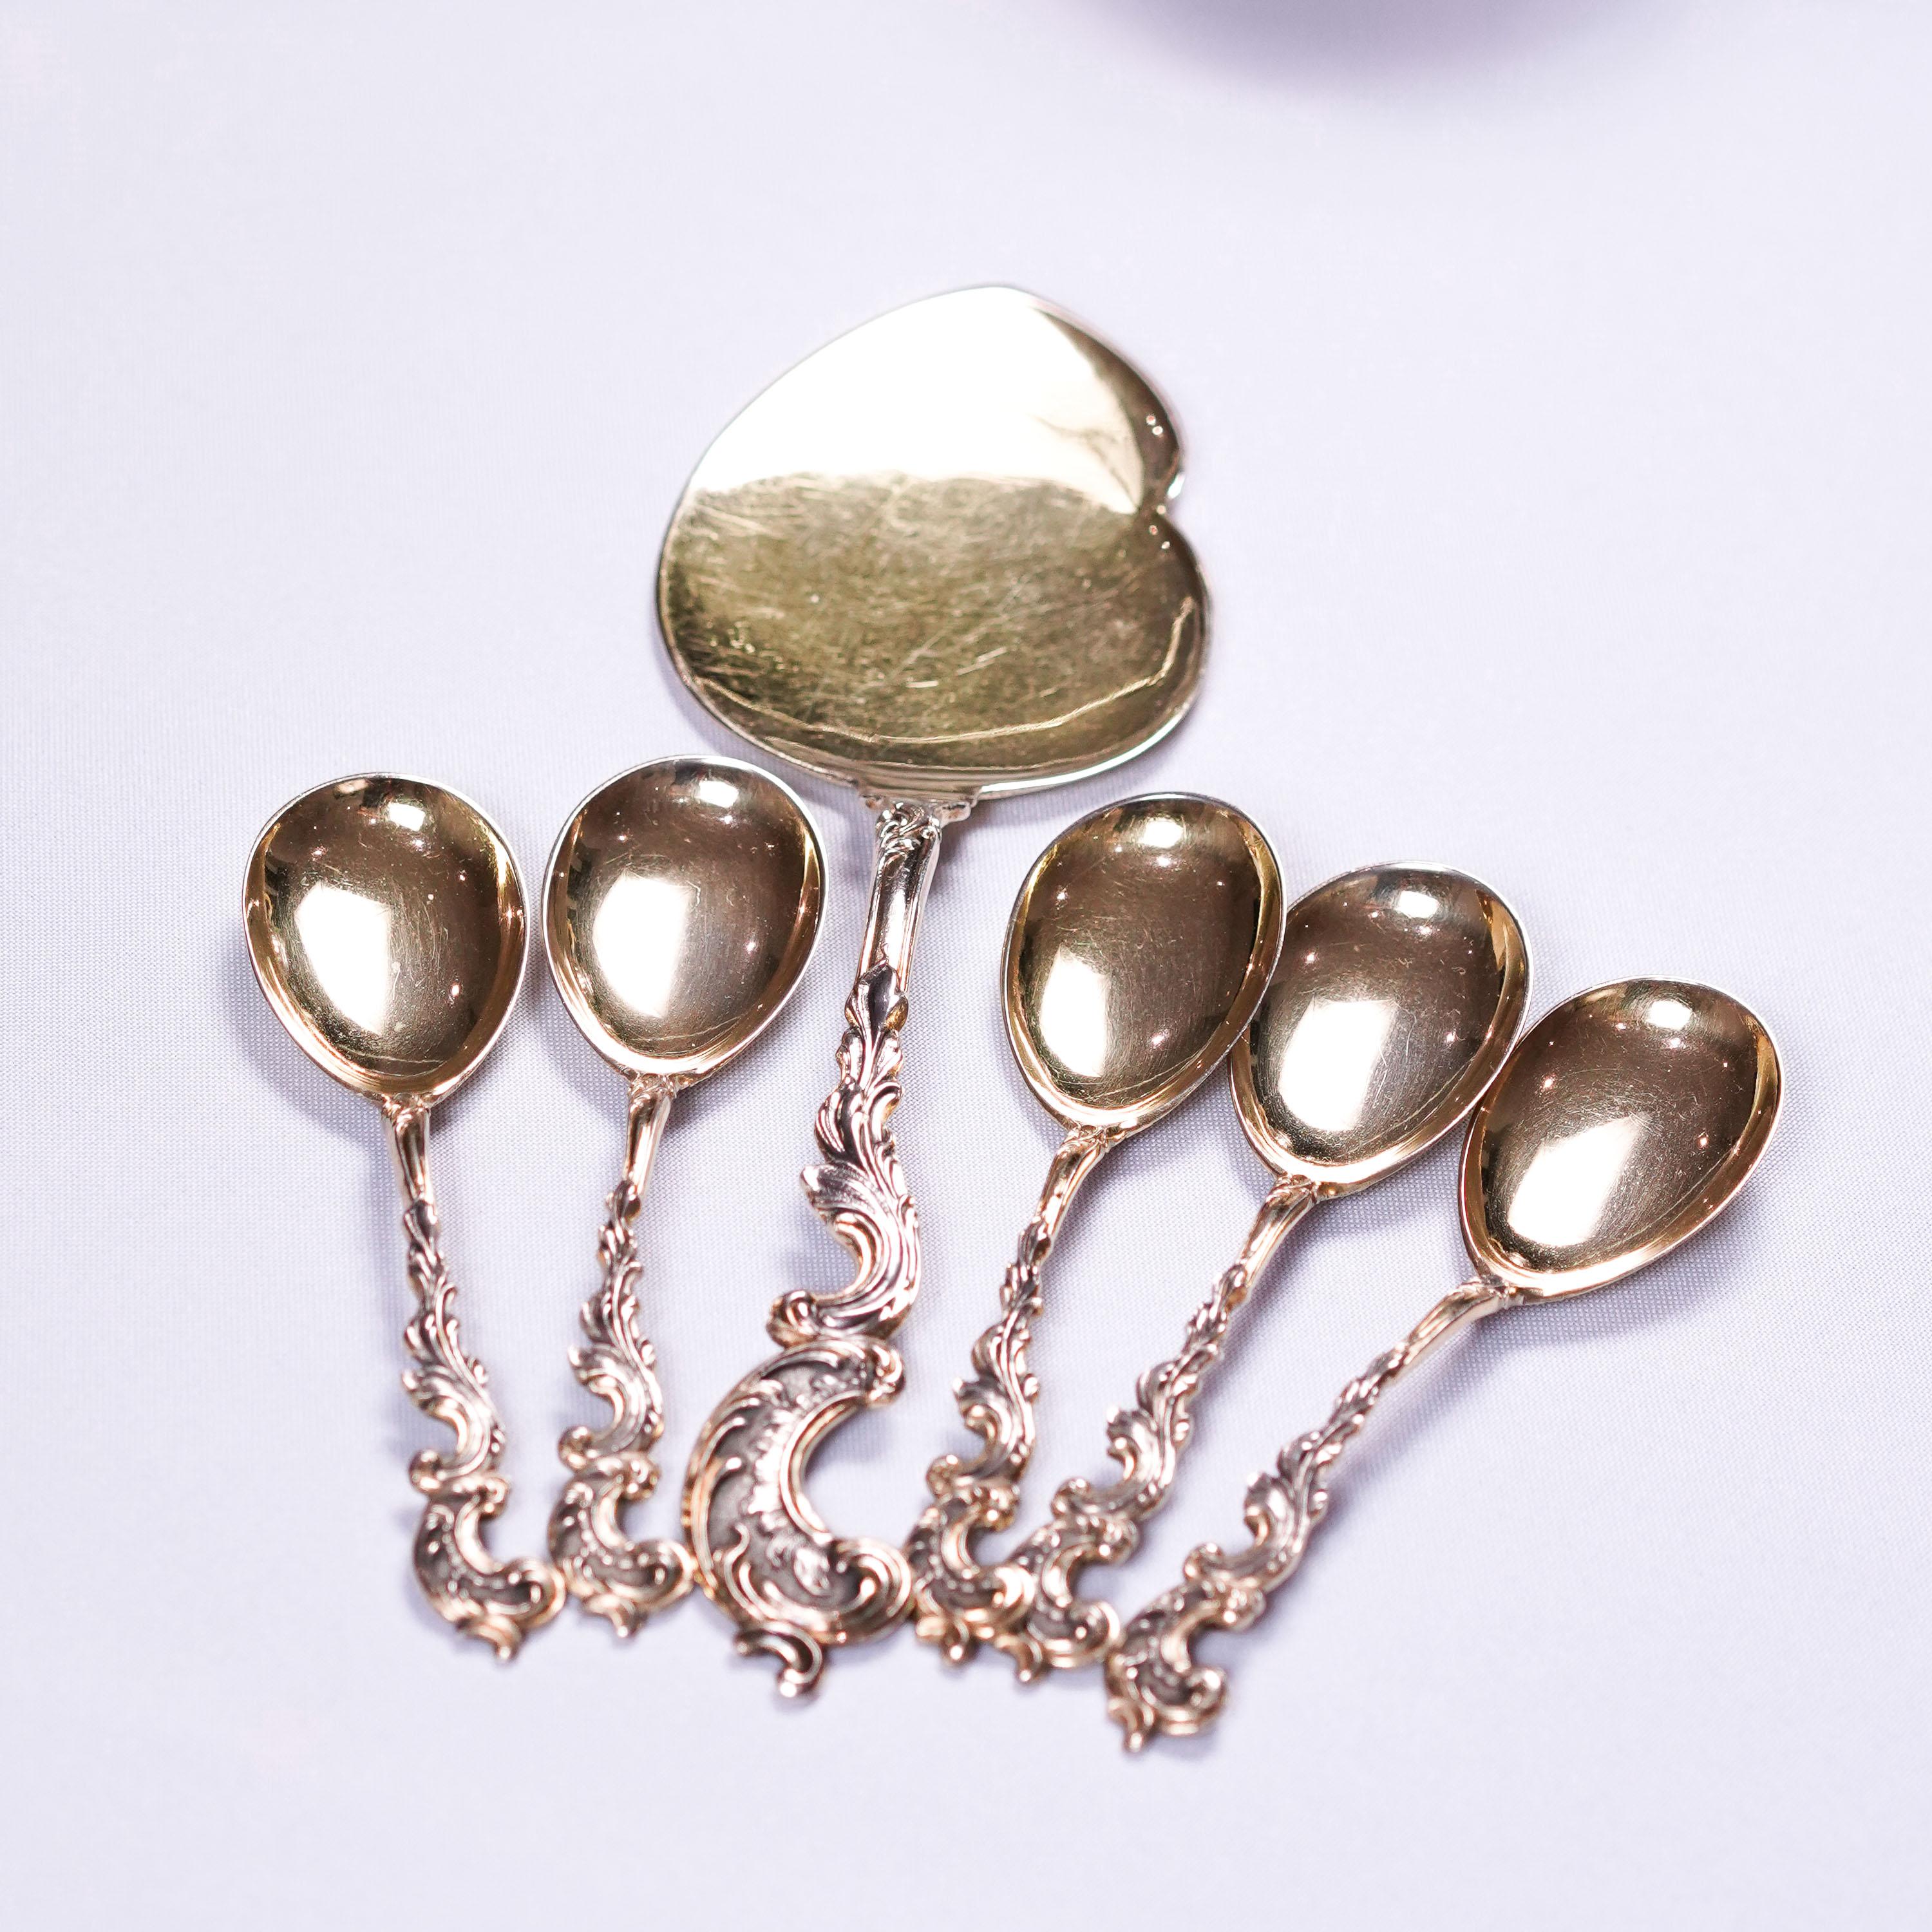 Antique German Solid Silver Icecream Server & Spoons in Rococo Style - c.1900 For Sale 2